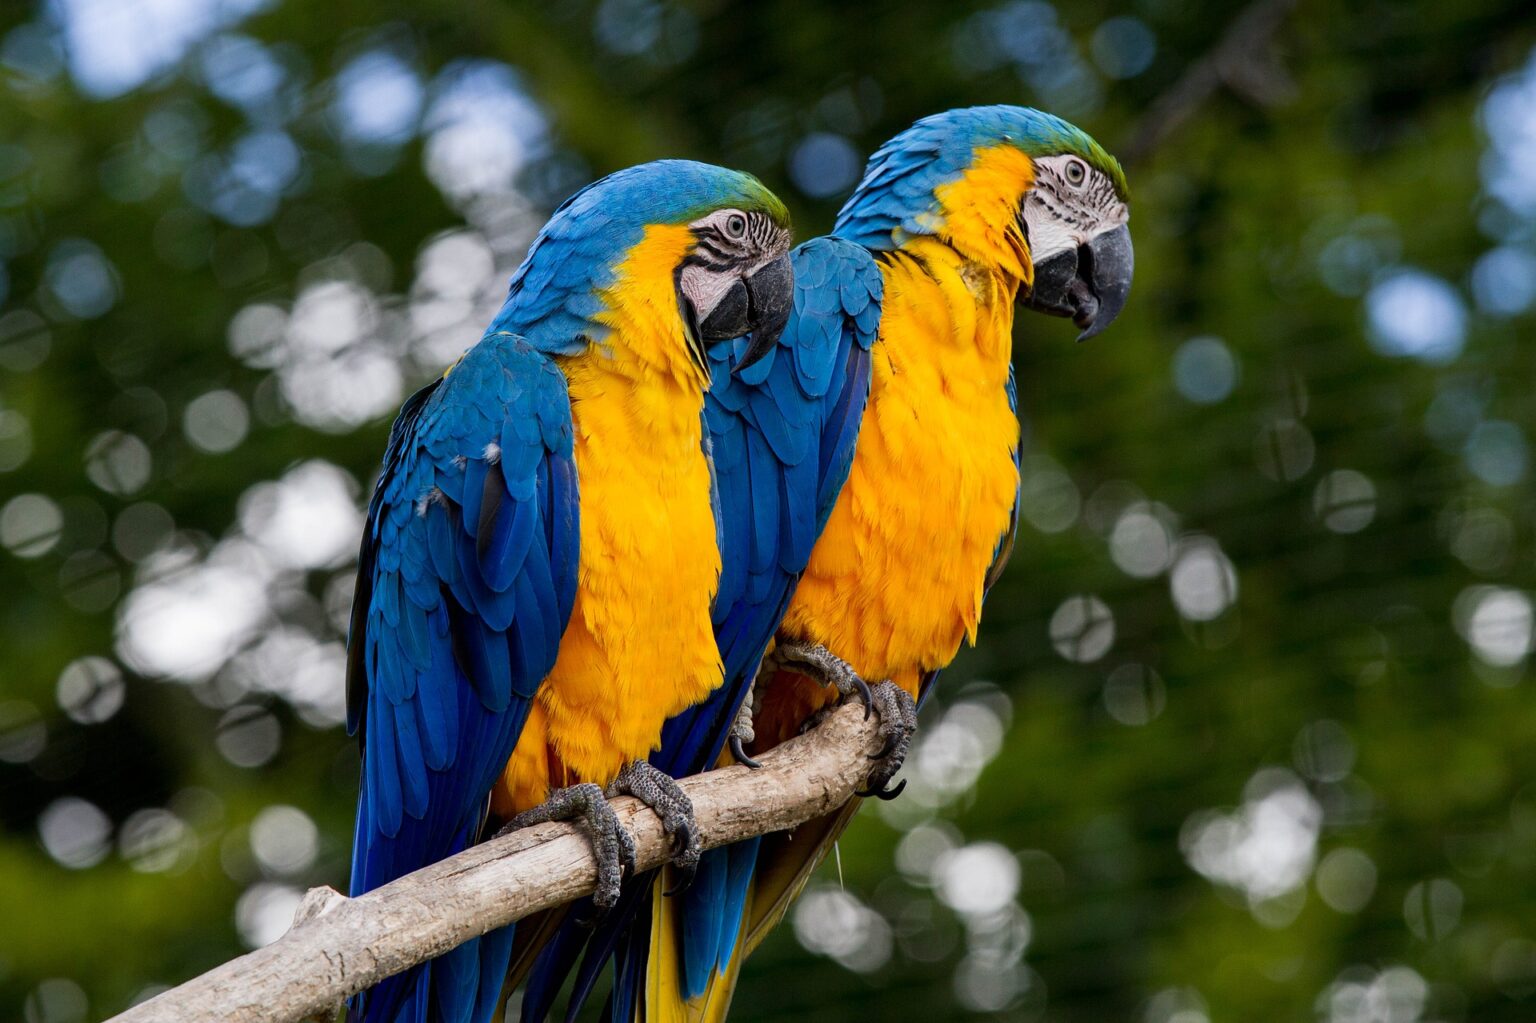 macaw-gd8be732d7_1920